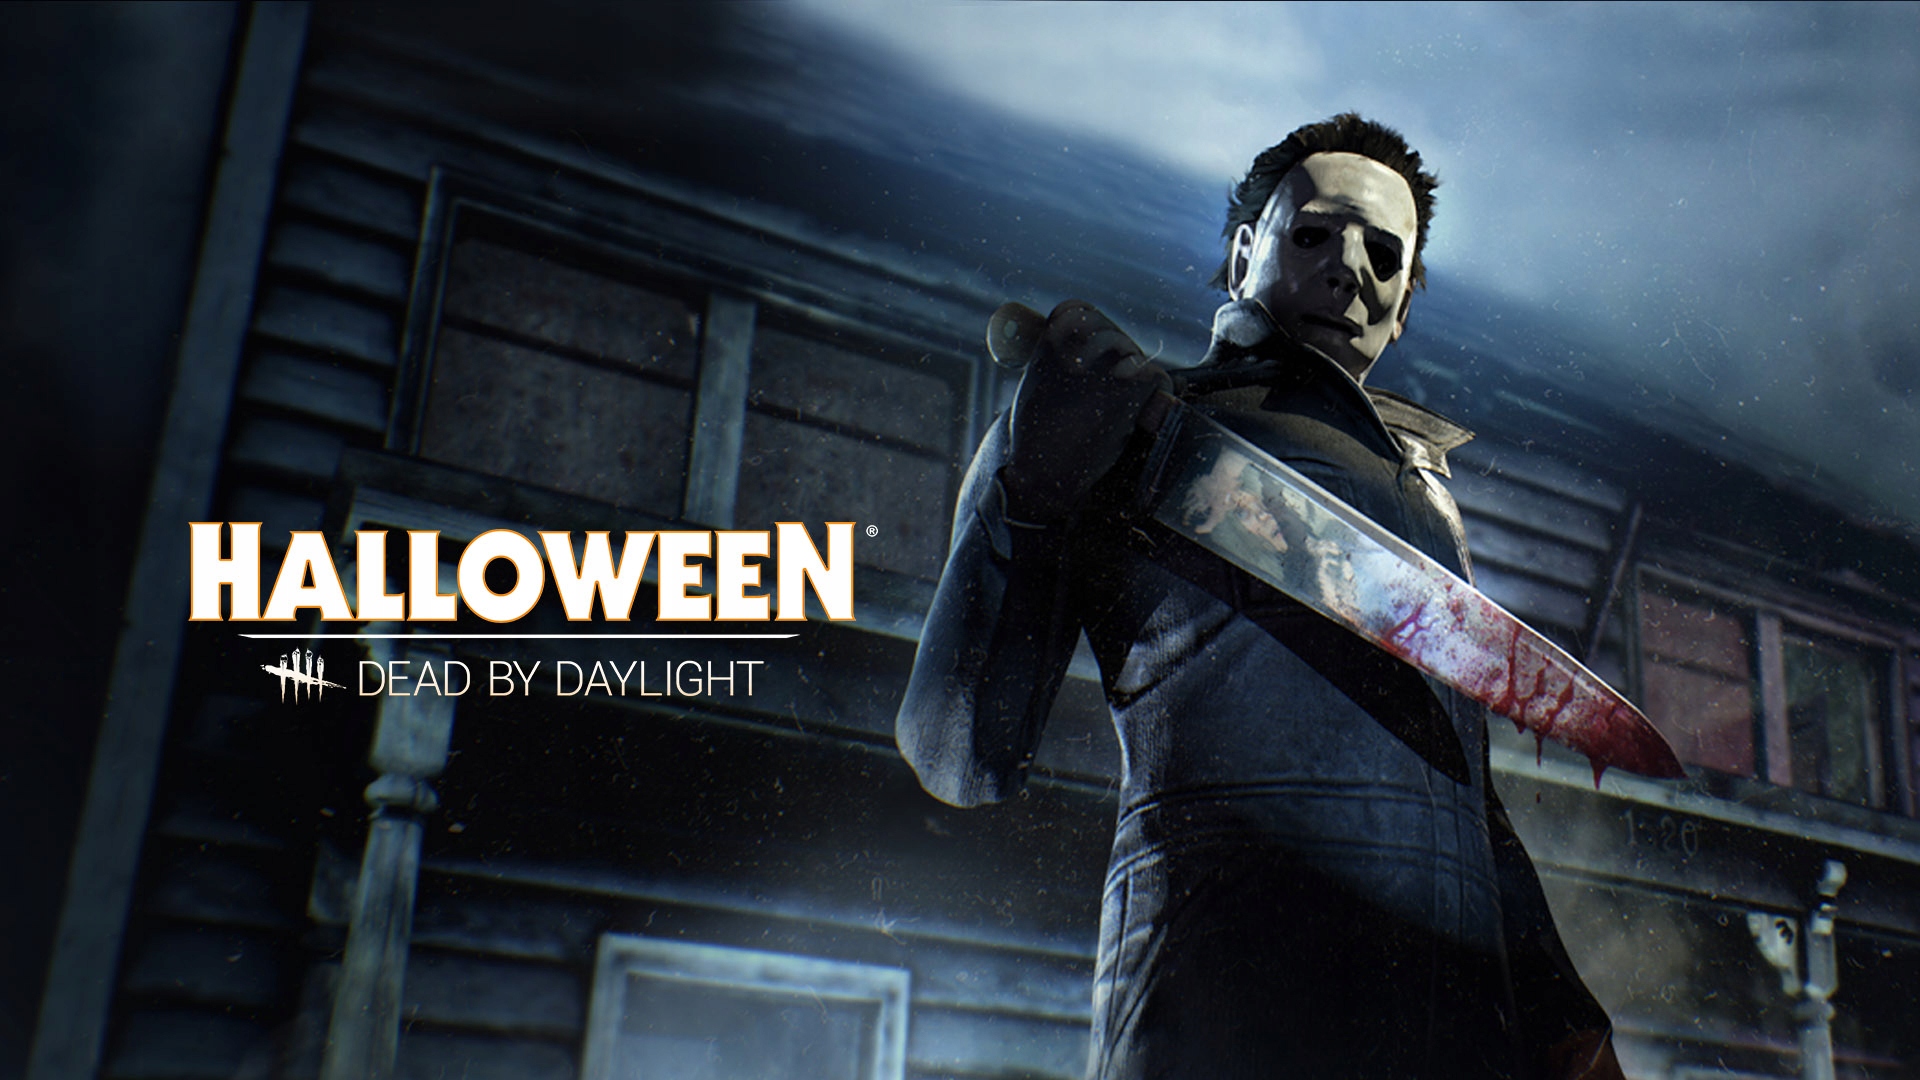 Dead by Daylight: The Halloween XBOX ONE / SERIES X|S?